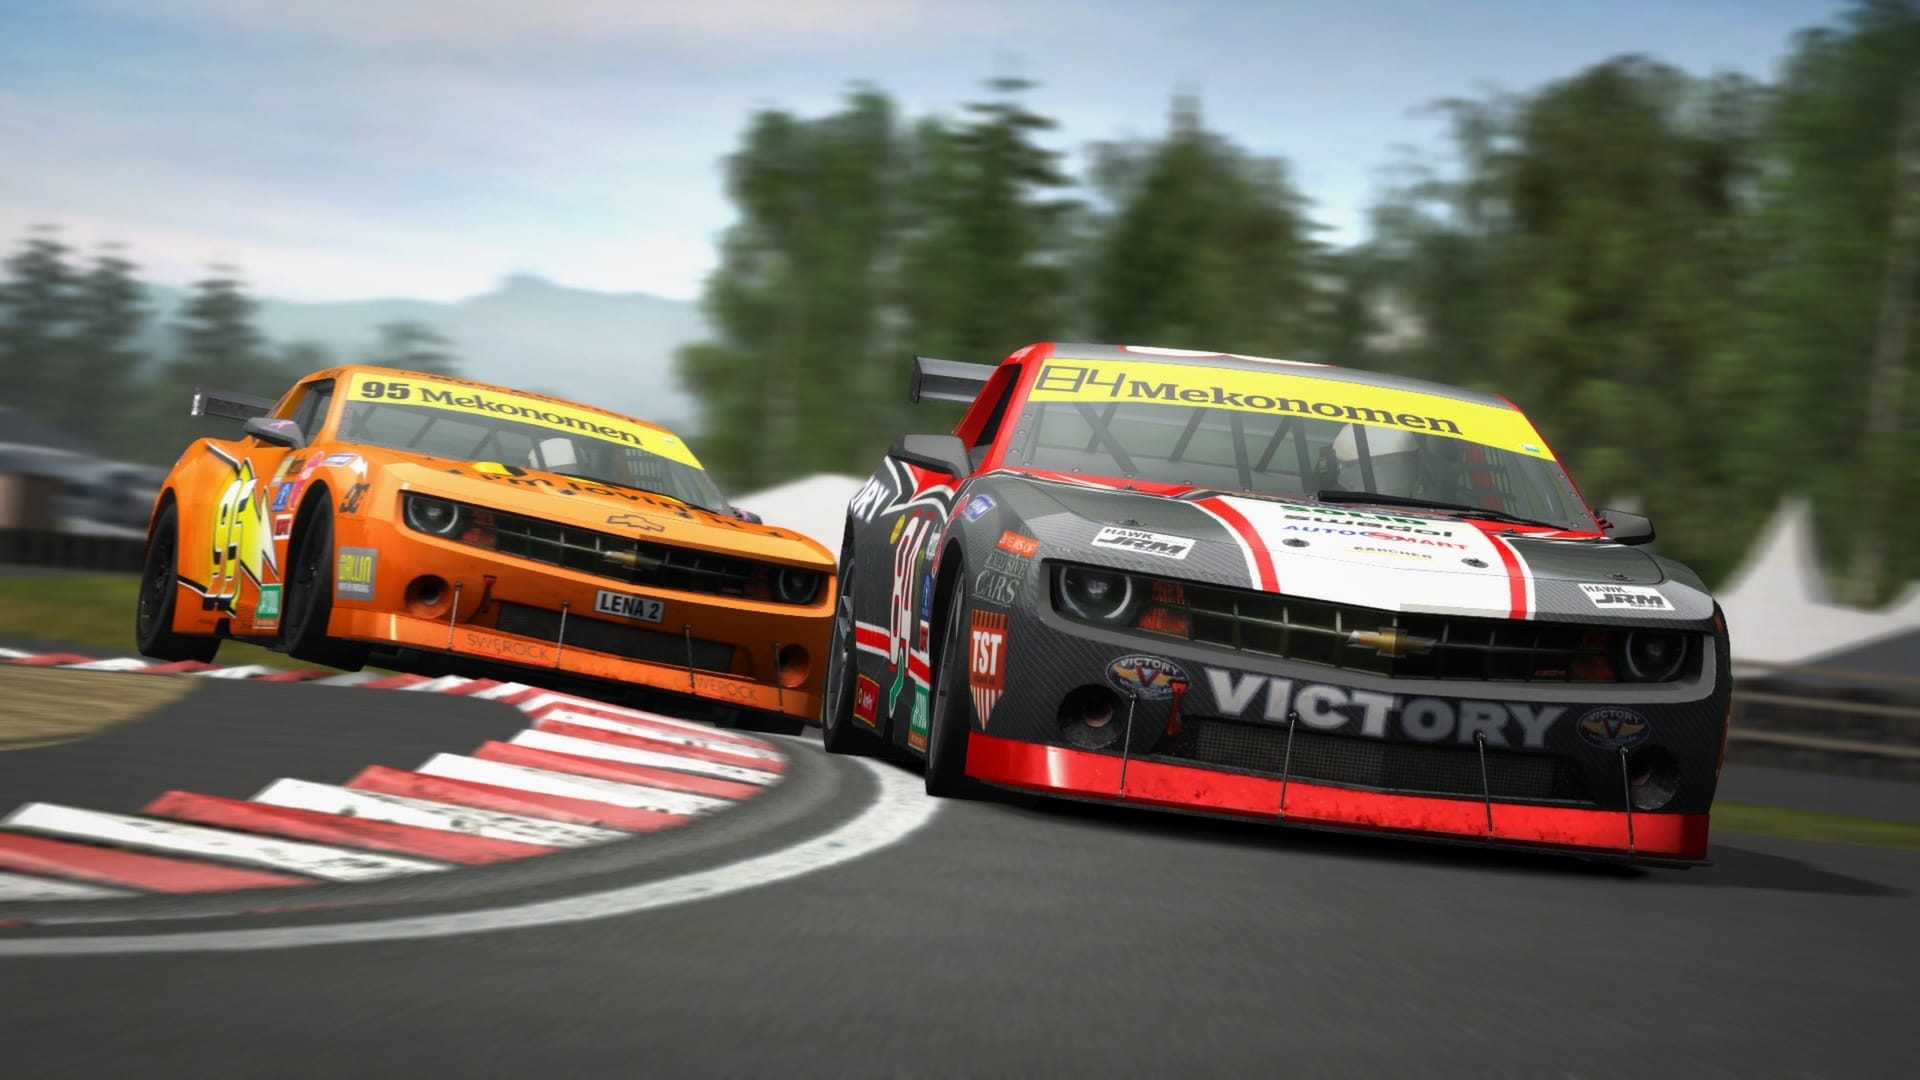 How to Download Car Racing Games in PC/Laptop for FREE, Best Method